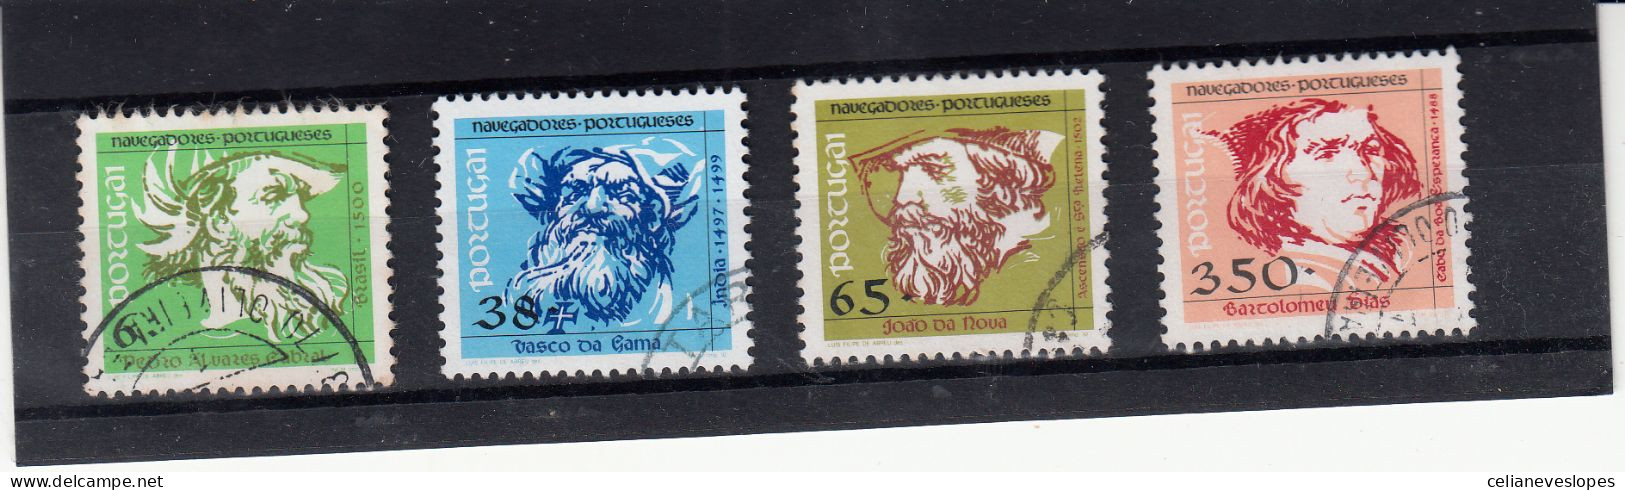 Portugal, Navegadores Portugueses, 1992, Mundifil Nº 2061 A 2064 Used - Used Stamps